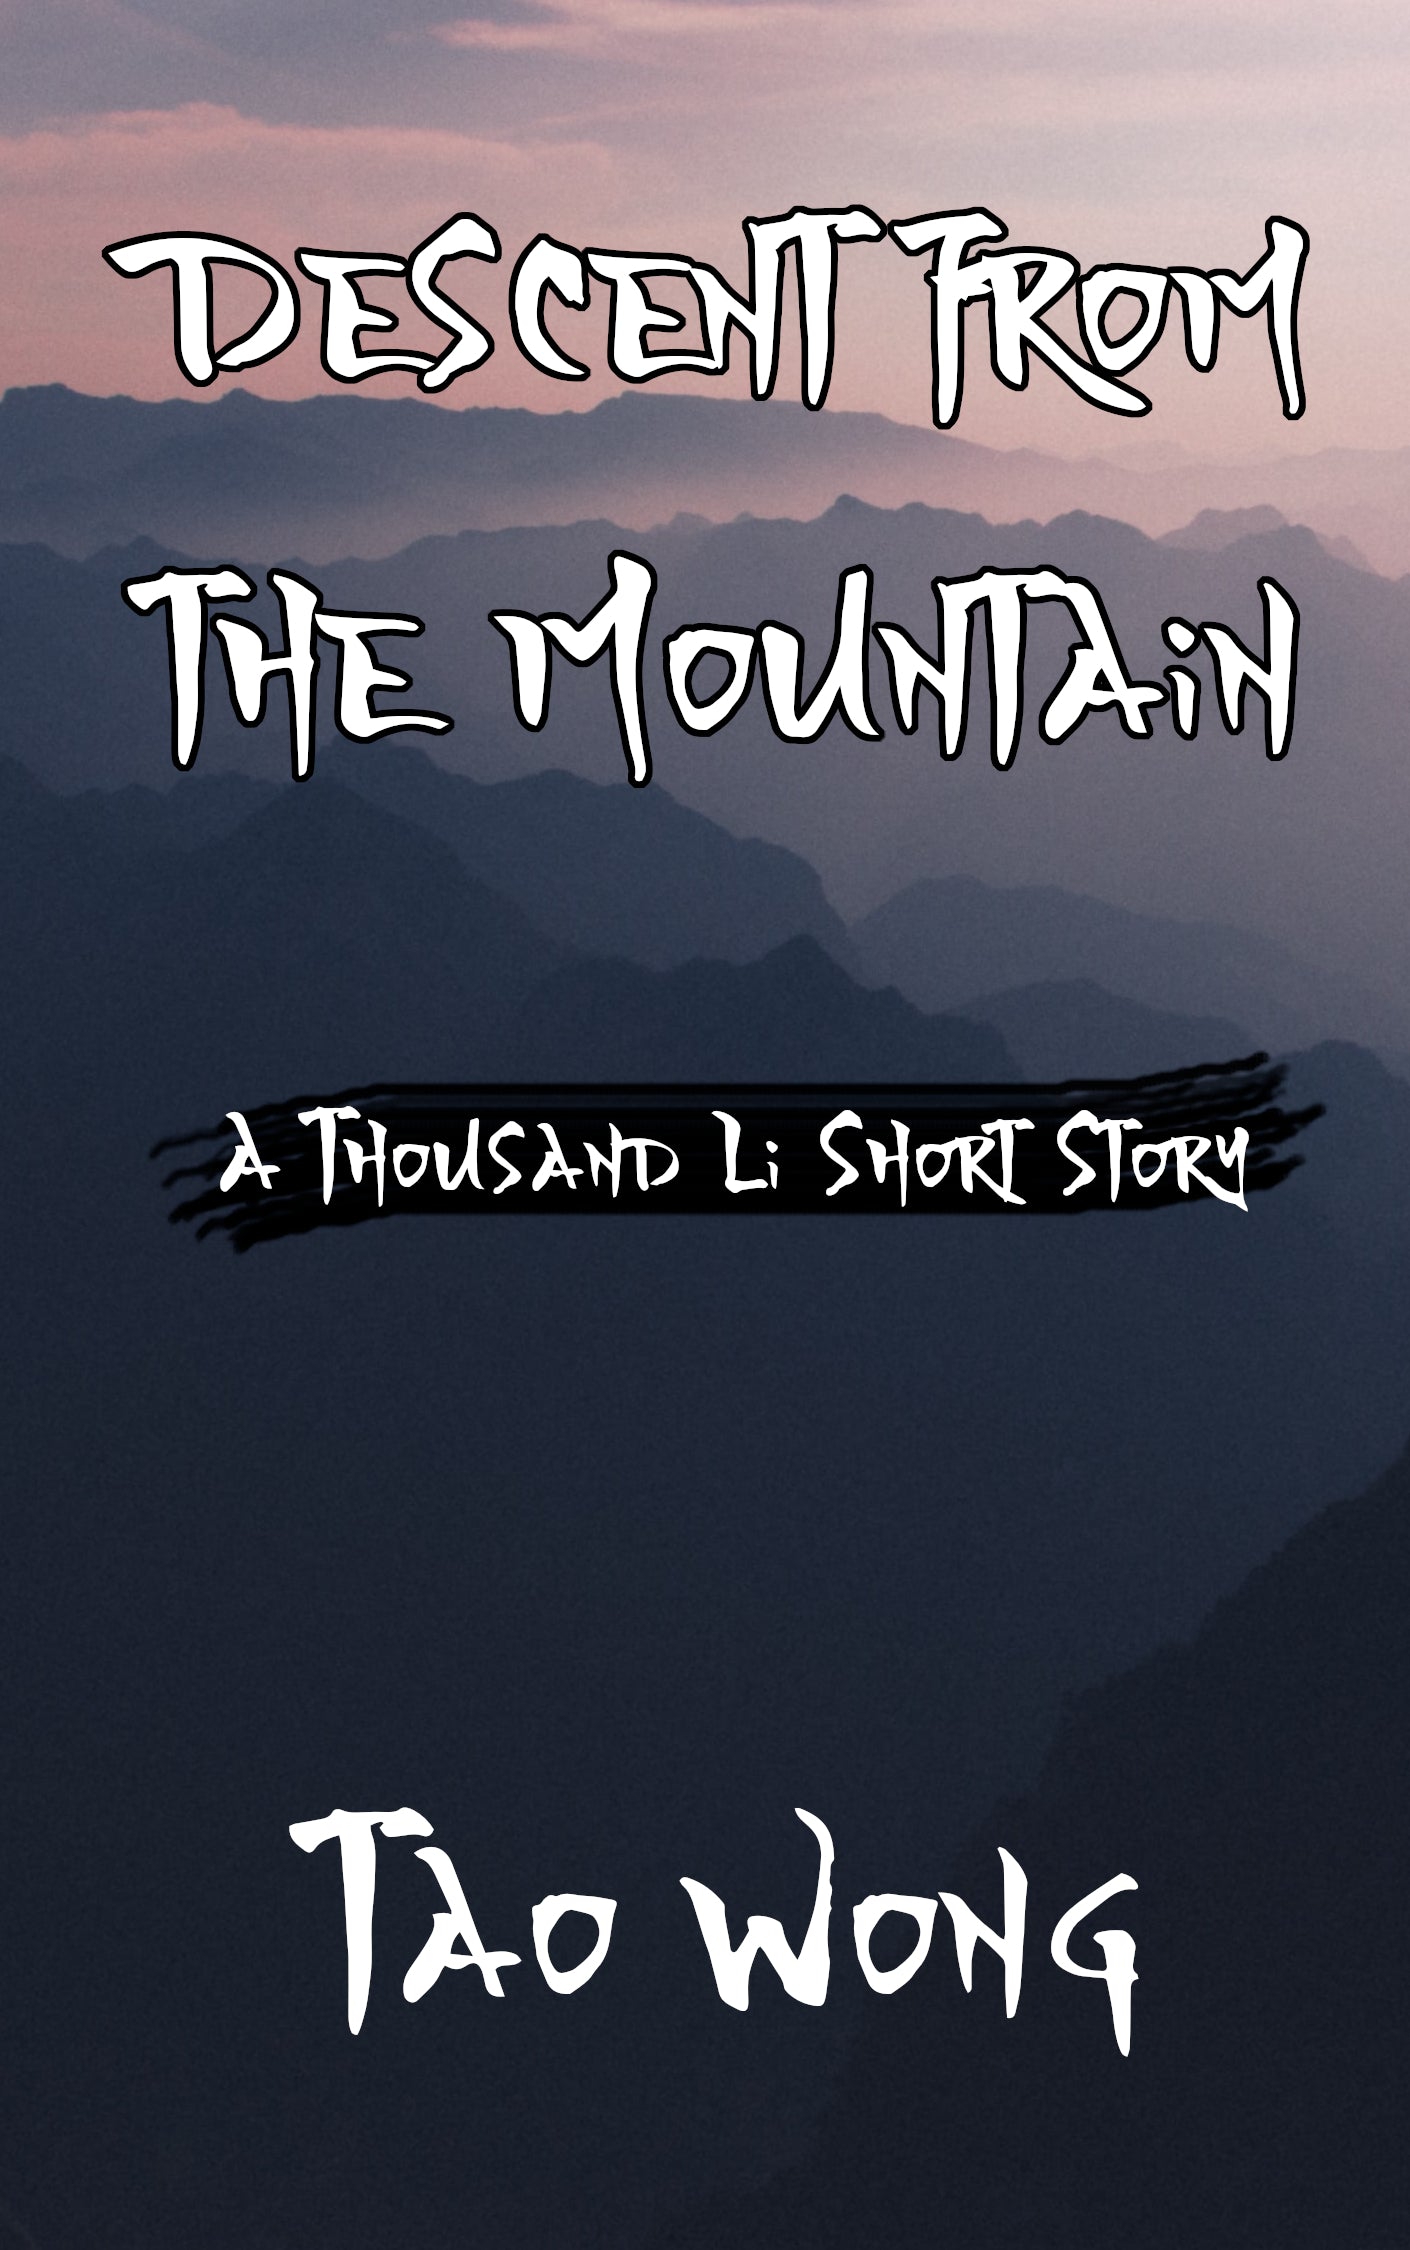 Descent from the Mountain (A Thousand Li Short Story)